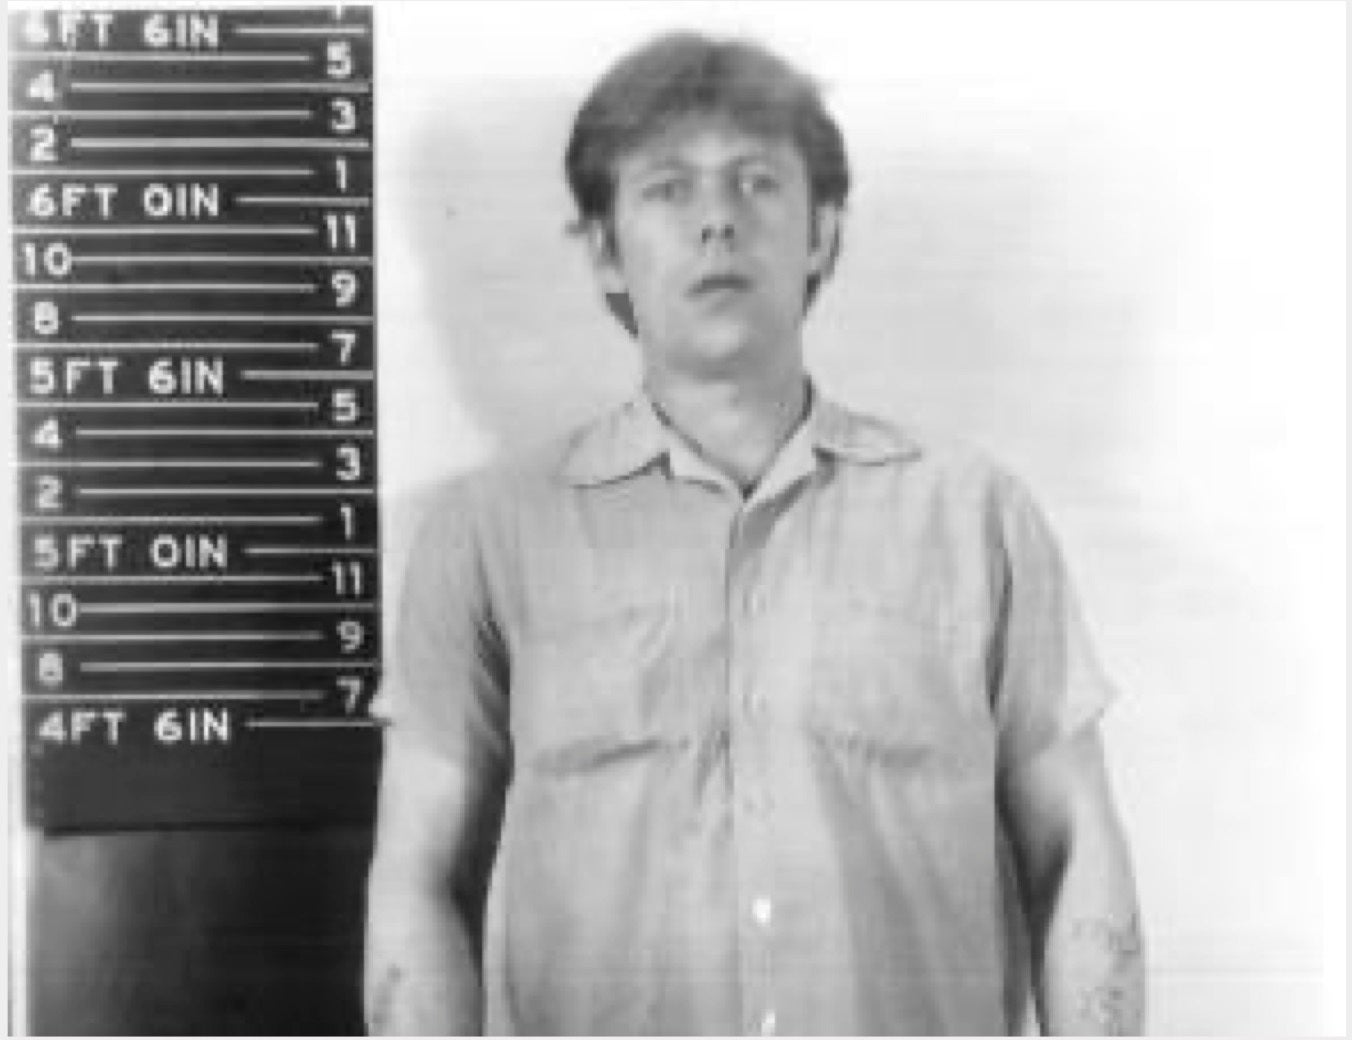 Harry Edward Greenwell, pictured in an undated booking photo, died in 2013 but was named last week by authorities as the I-65 Killer, who preyed upon female motel workers in the late 1980s